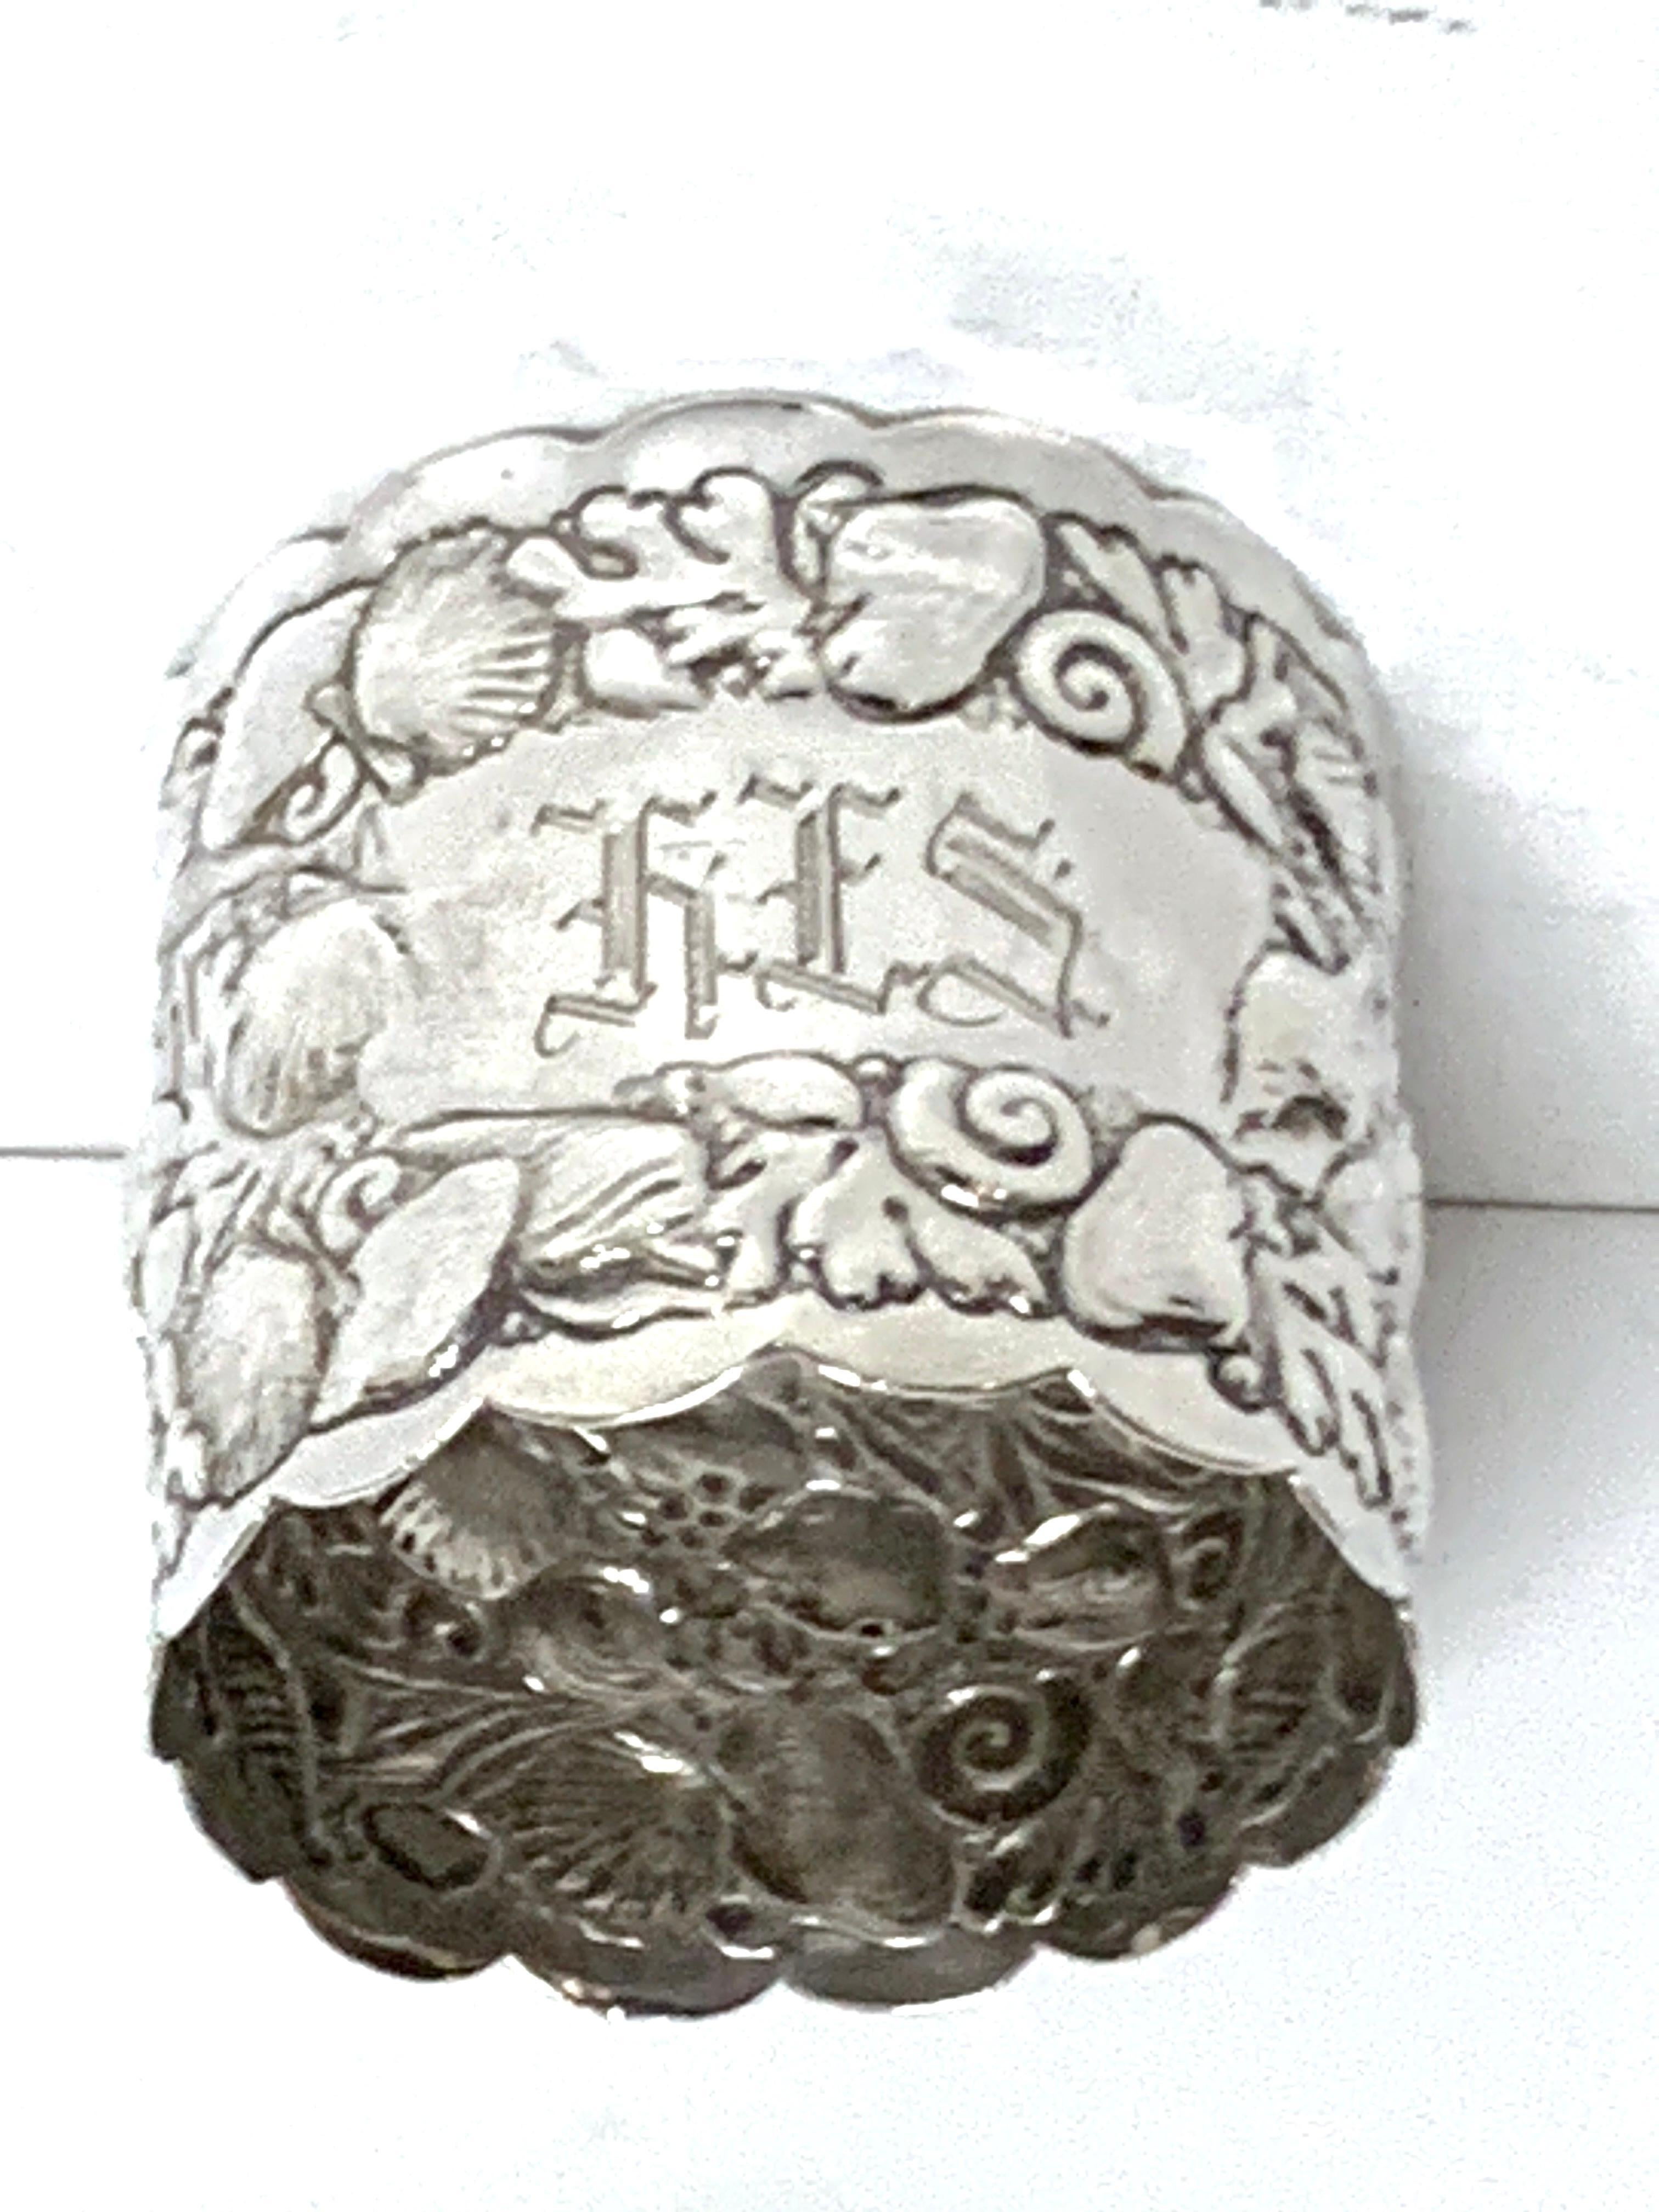 Gorham sterling Narragansett style pattern napkin ring #1850
A variation of the Narragansett pattern with shells, seaweed, oysters, scallops coral, crab, and snails. Monogram of 